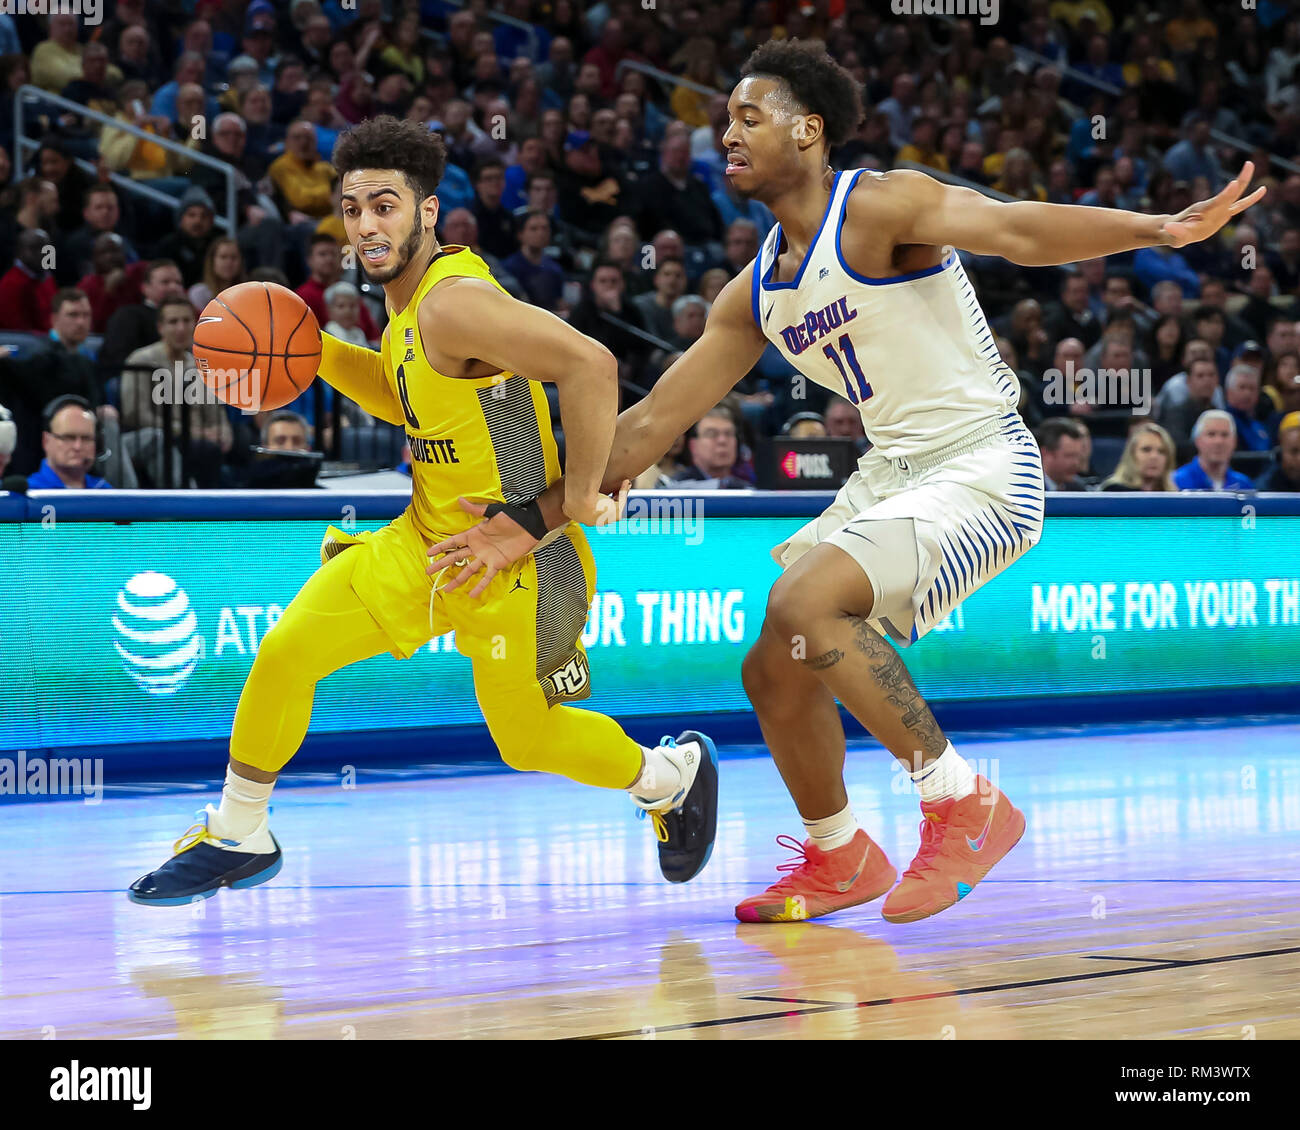 Chicago, USA. 12th Feb 2019. Marquette Golden Eagles guard Markus Howard (0) drives past the defense of DePaul Blue Demons guard Eli Cain (11) during NCAA basketball game between the Marquette Golden Eagles and the DePaul University Blue Demons at Wintrust Arena in Chicago IL. Gary E. Duncan Sr/CSM Credit: Cal Sport Media/Alamy Live News Stock Photo